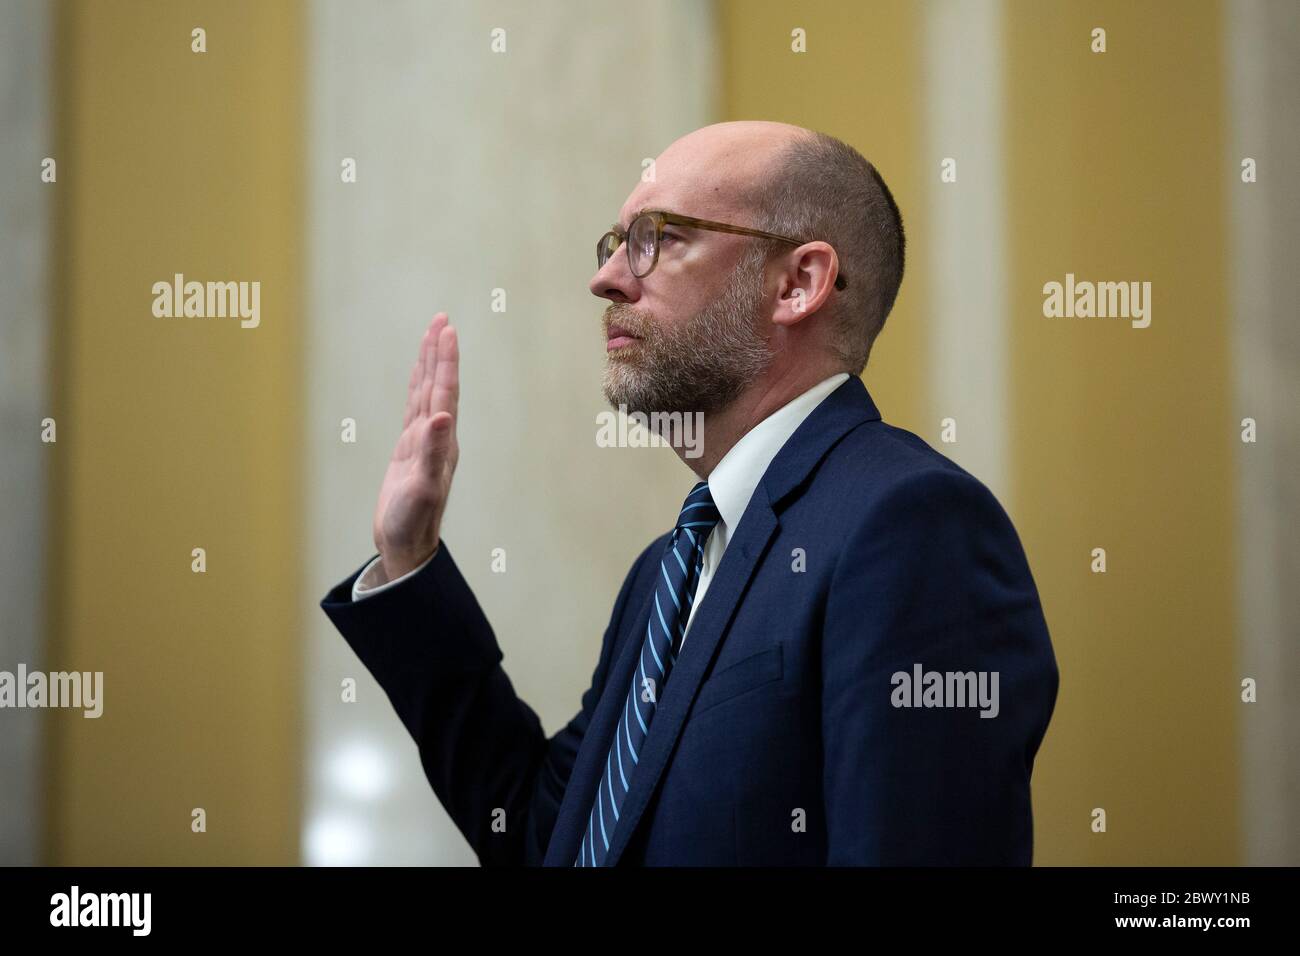 Director, Office of Management and Budget (OMB) Russell Vought is sworn in  before the United States Senate Committee on the Budget on Capitol Hill in  Washington, DC, U.S., on Wednesday, June 3,